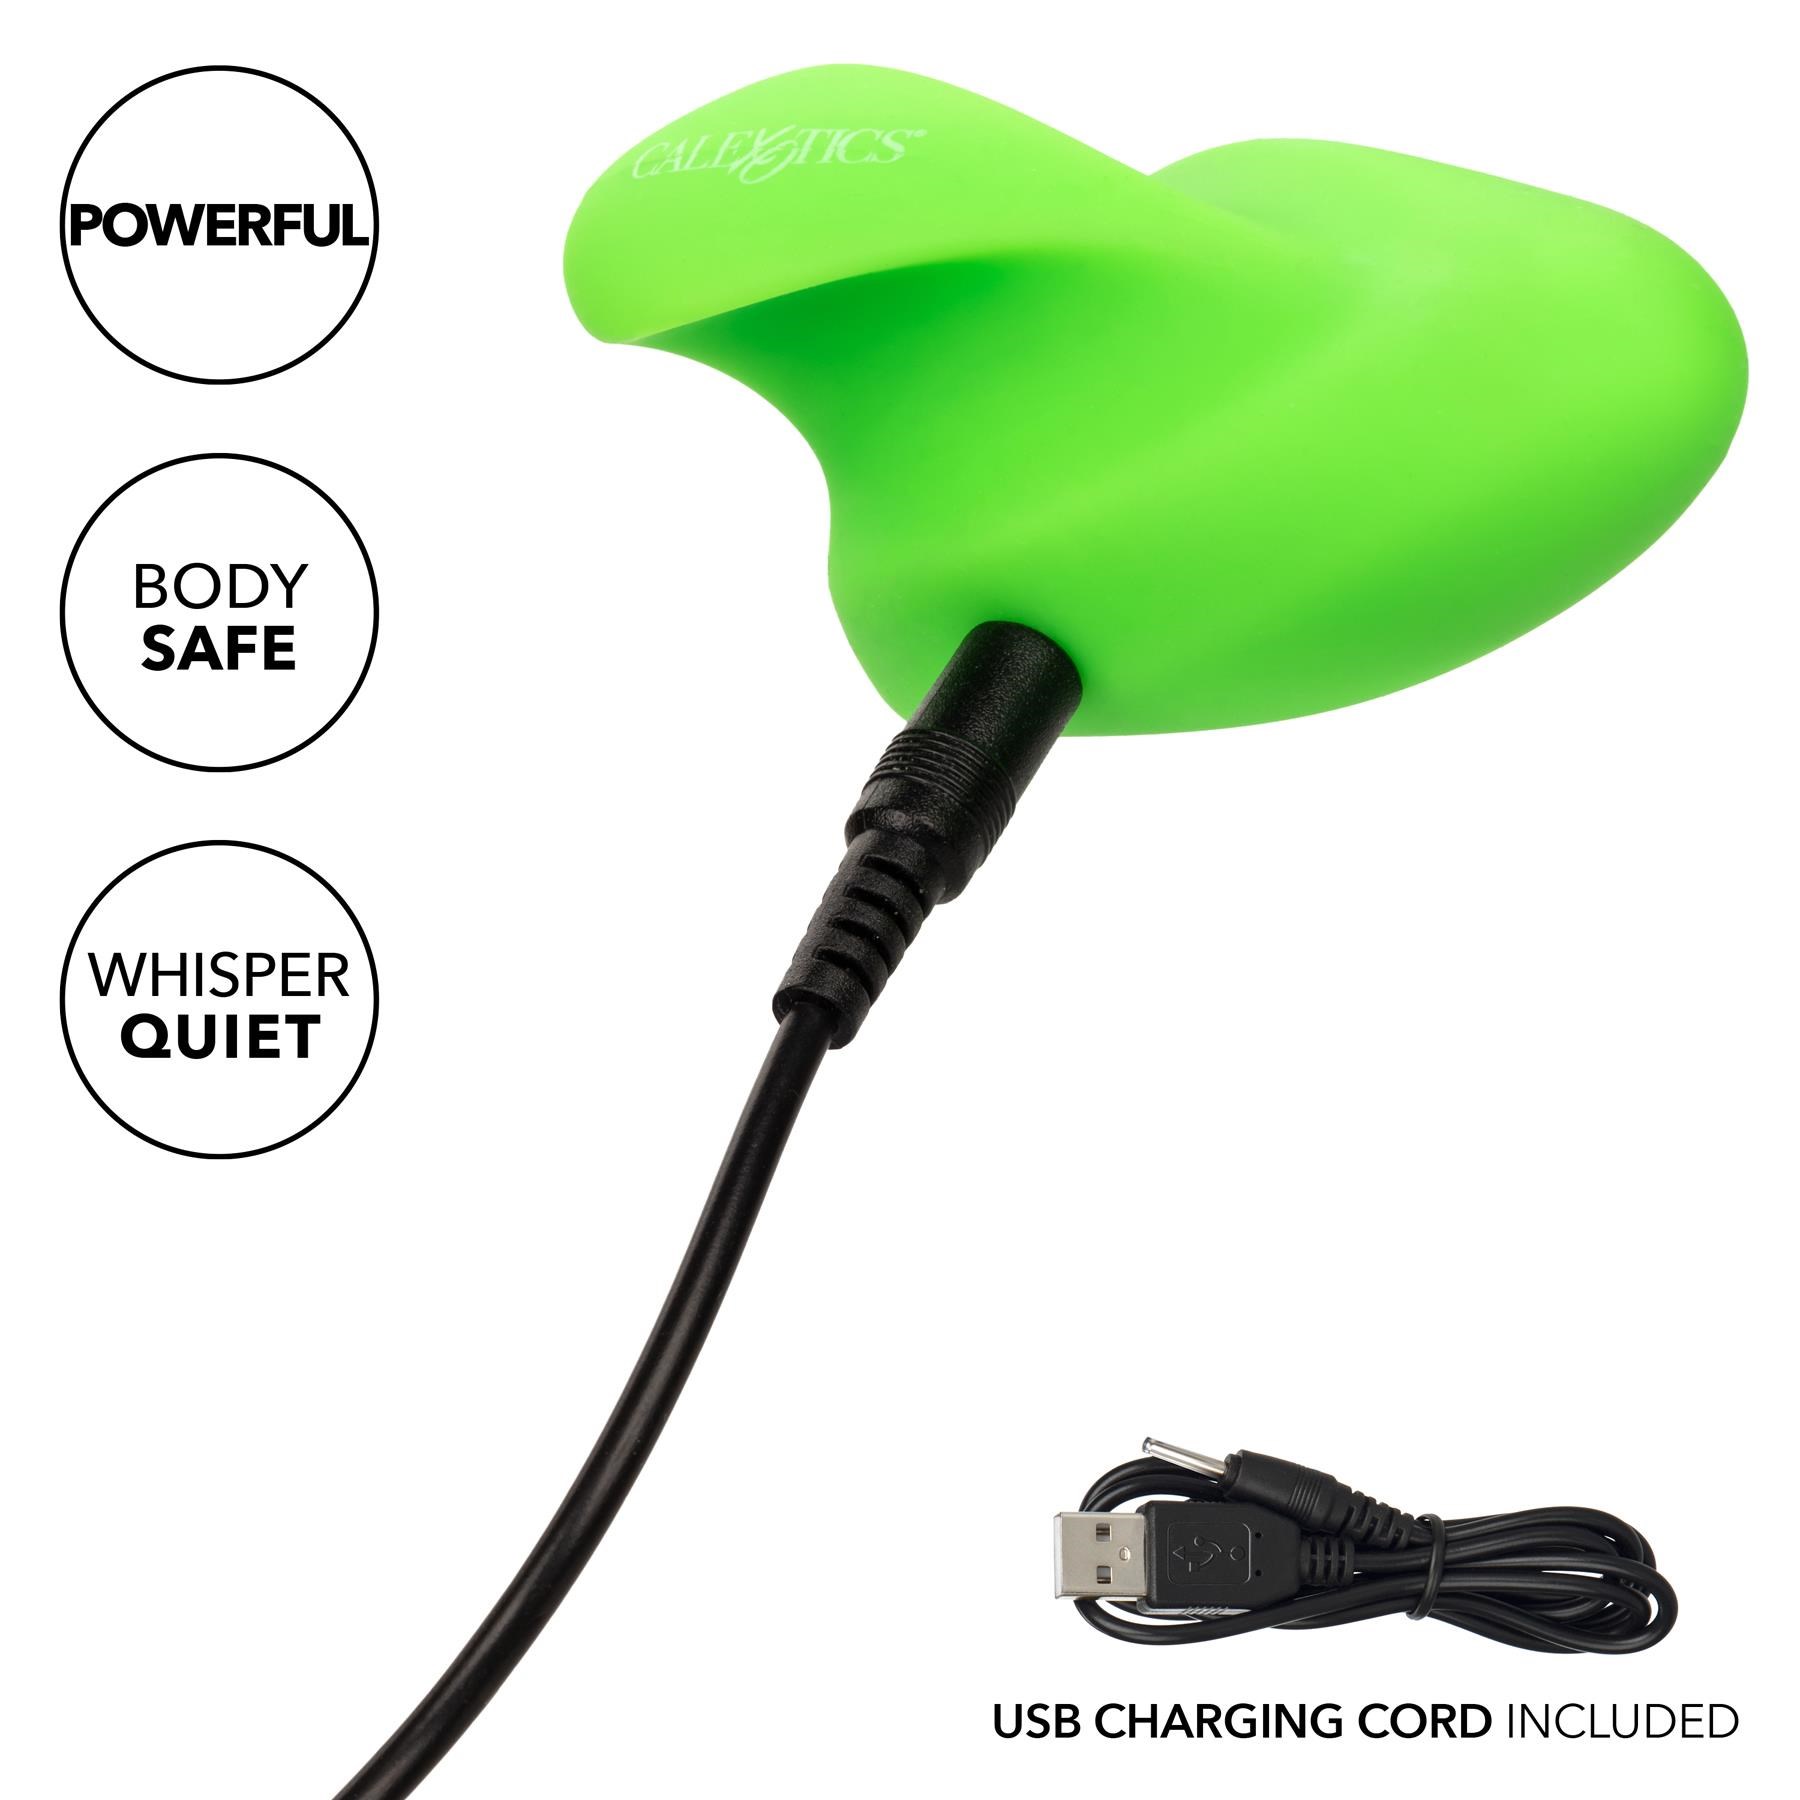 Neon Vibes The Ecstasy Finger Vibrator- Showing Where Charging Cable is Placed